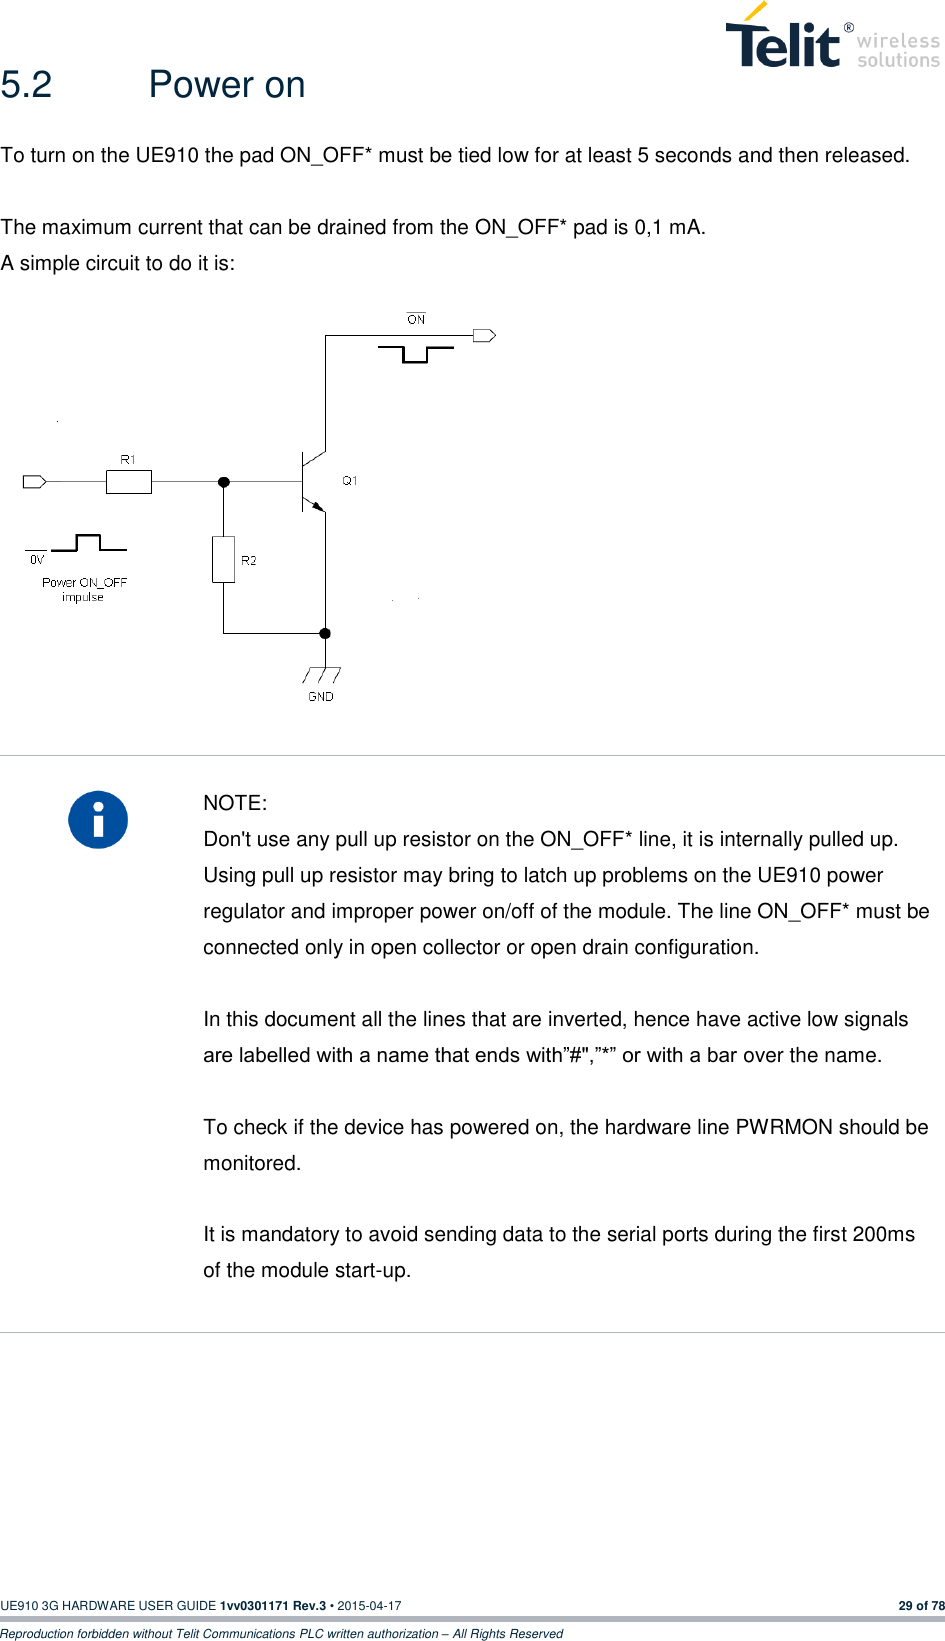  UE910 3G HARDWARE USER GUIDE 1vv0301171 Rev.3 • 2015-04-17 29 of 78 Reproduction forbidden without Telit Communications PLC written authorization – All Rights Reserved 5.2  Power on To turn on the UE910 the pad ON_OFF* must be tied low for at least 5 seconds and then released.  The maximum current that can be drained from the ON_OFF* pad is 0,1 mA. A simple circuit to do it is:                NOTE: Don&apos;t use any pull up resistor on the ON_OFF* line, it is internally pulled up. Using pull up resistor may bring to latch up problems on the UE910 power regulator and improper power on/off of the module. The line ON_OFF* must be connected only in open collector or open drain configuration.  In this document all the lines that are inverted, hence have active low signals are labelled with a name that ends with”#&quot;,”*” or with a bar over the name.  To check if the device has powered on, the hardware line PWRMON should be monitored.  It is mandatory to avoid sending data to the serial ports during the first 200ms of the module start-up.        